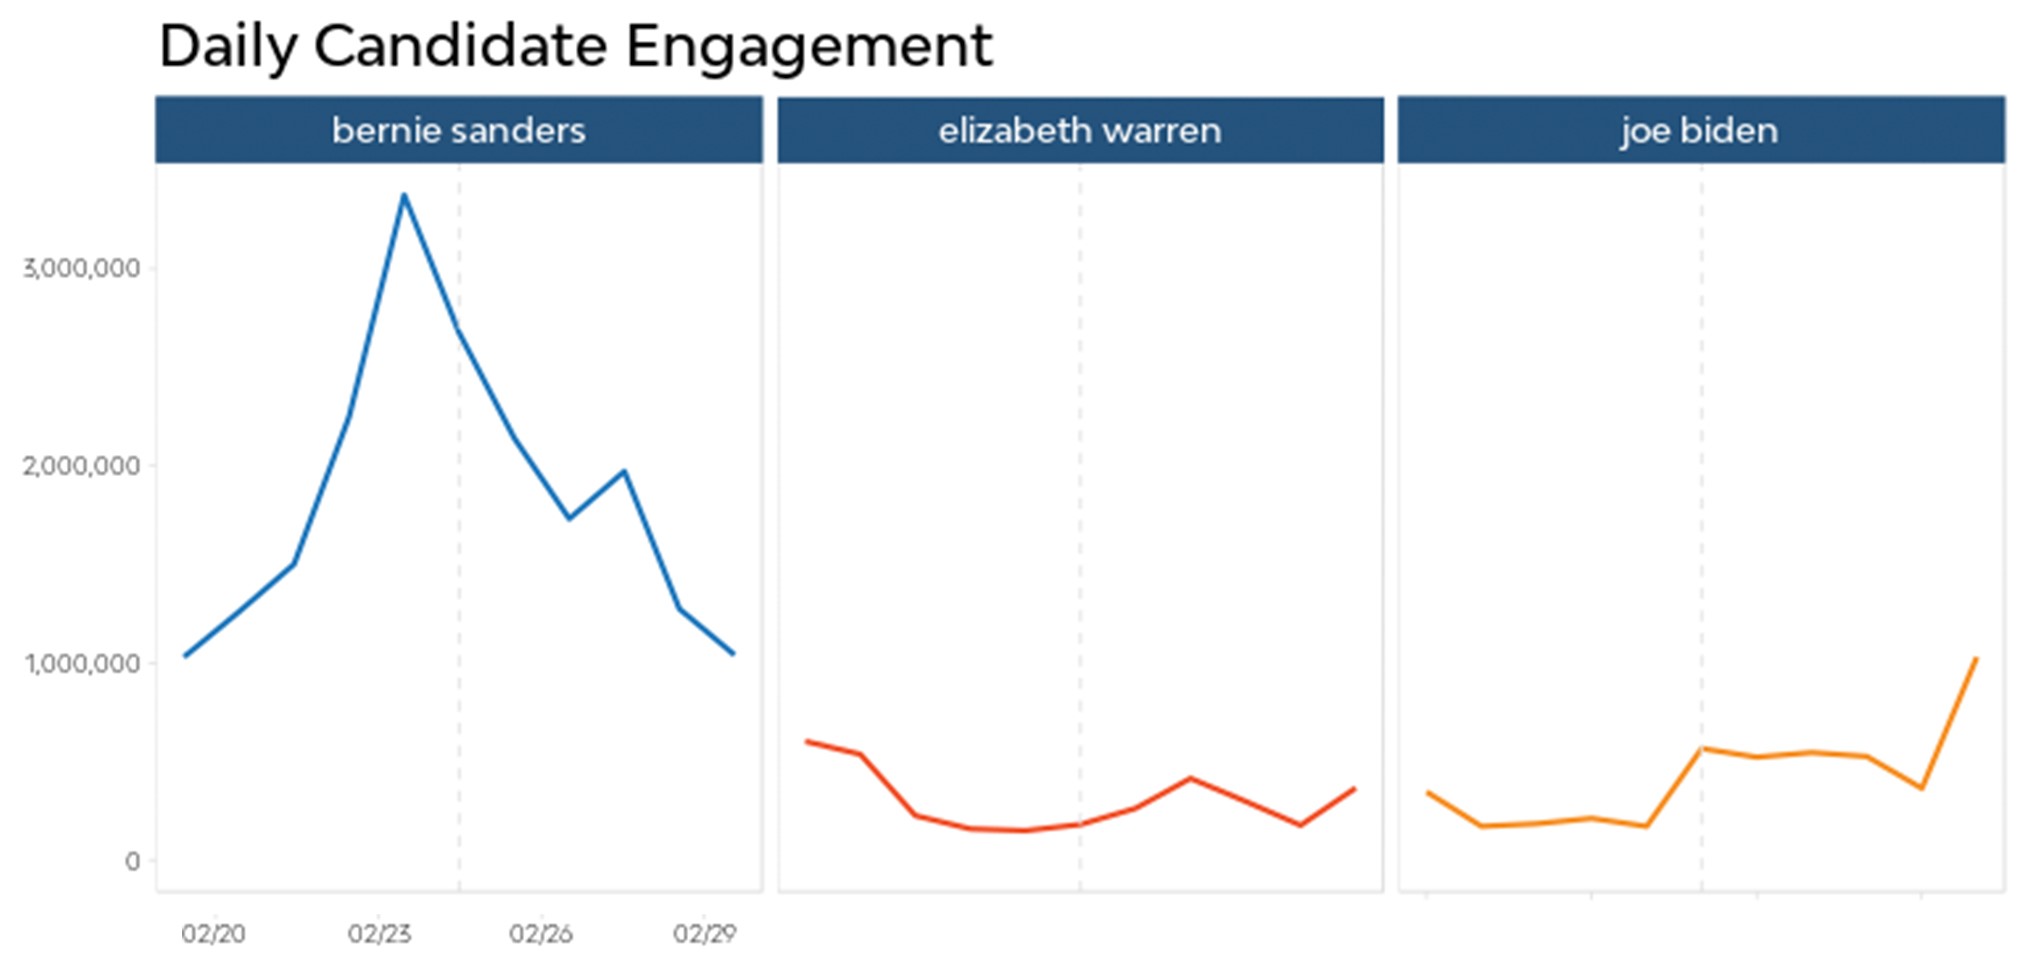 Online engagement around the February 25 debate: who won, who lost?